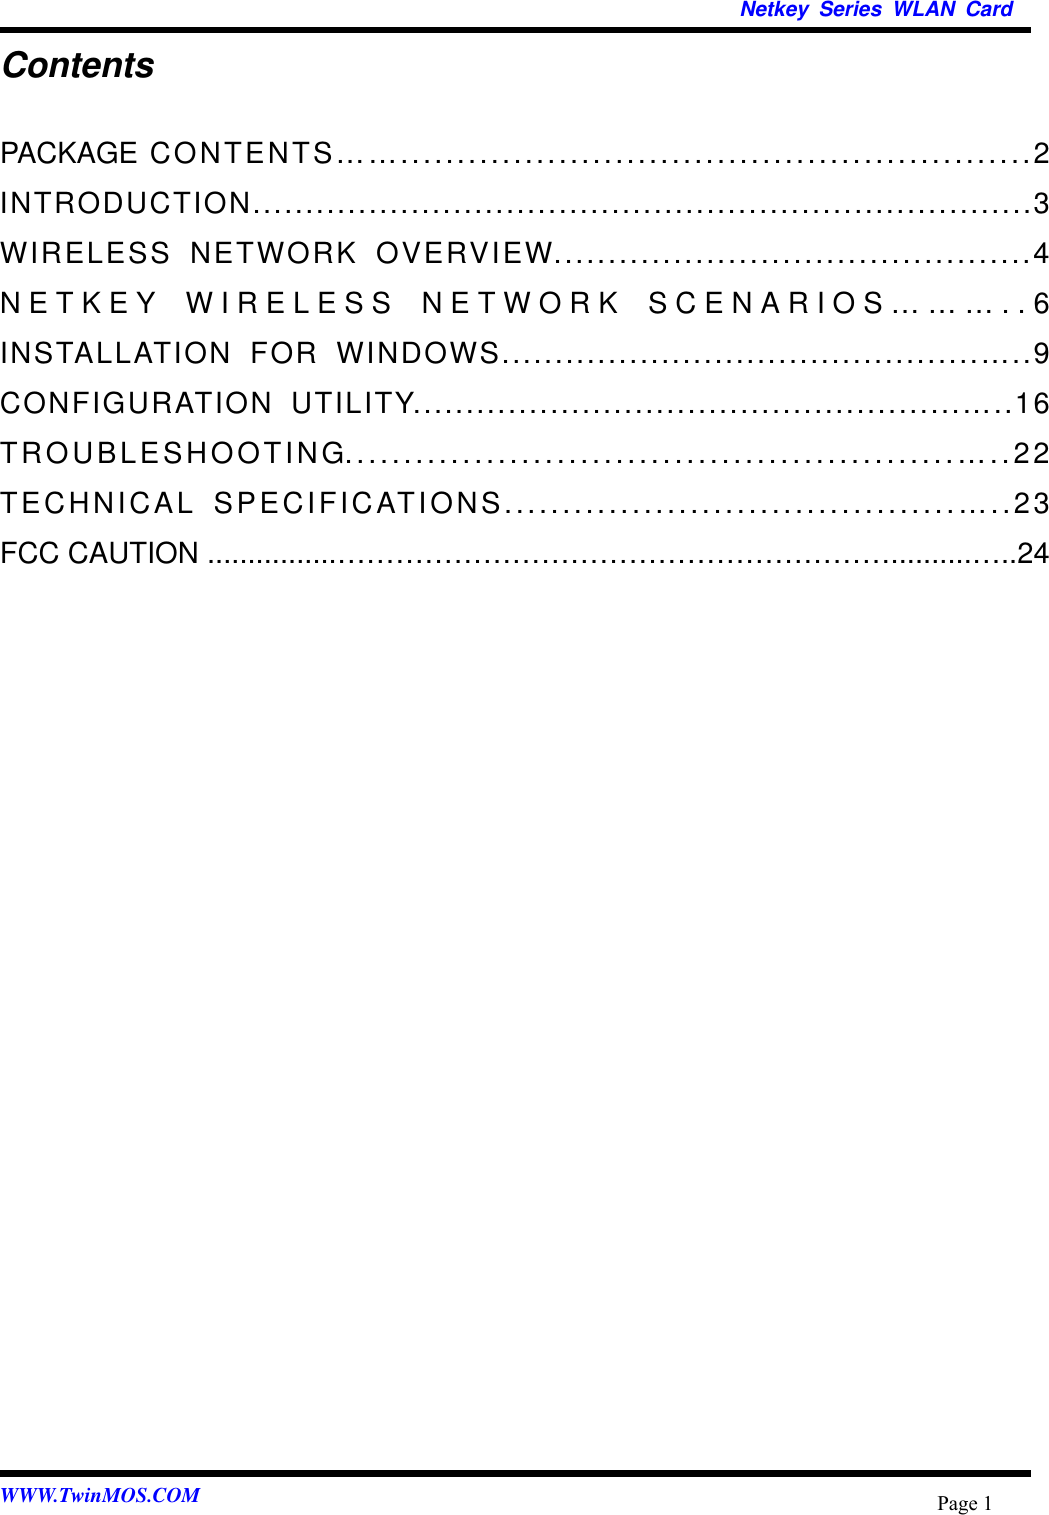   Netkey Series WLAN Card WWW.TwinMOS.COM  Page 1Contents PACKAGE CONTENTS……........................................................2 INTRODUCTION..........................................................................3 WIRELESS NETWORK OVERVIEW............................................4 NETKEY WIRELESS NETWORK SCENARIOS………..6 INSTALLATION FOR WINDOWS.............................................…..9 CONFIGURATION UTILITY....................................................…..16 TROUBLESHOOTING....................................................…..22 TECHNICAL SPECIFICATIONS.......................................…..23 FCC CAUTION ................…………………………………………………..........…..24  